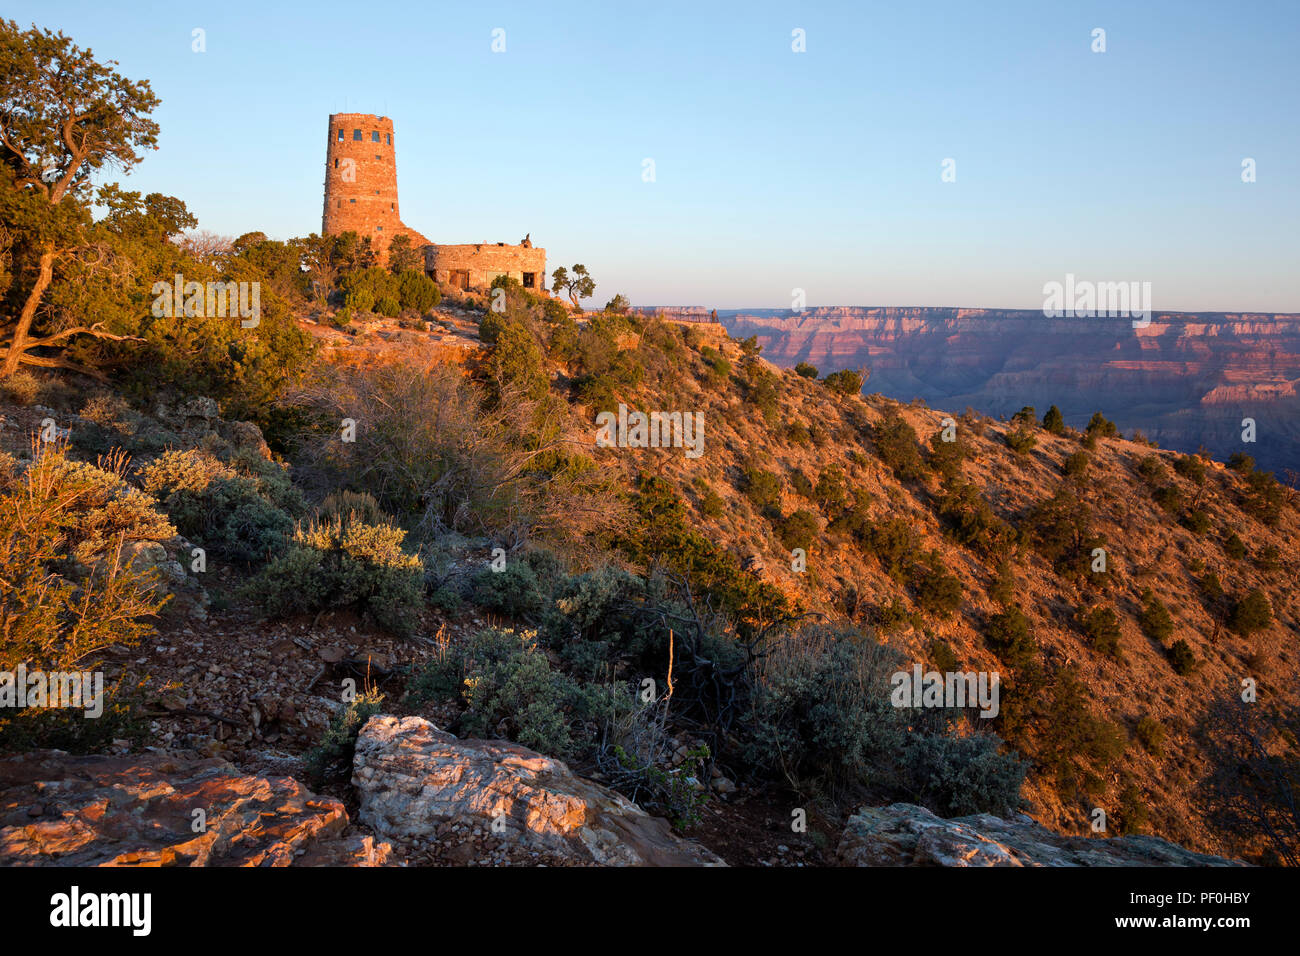 AZ00307-00...ARIAONA - The Desert View Watchtower in the early morning ...